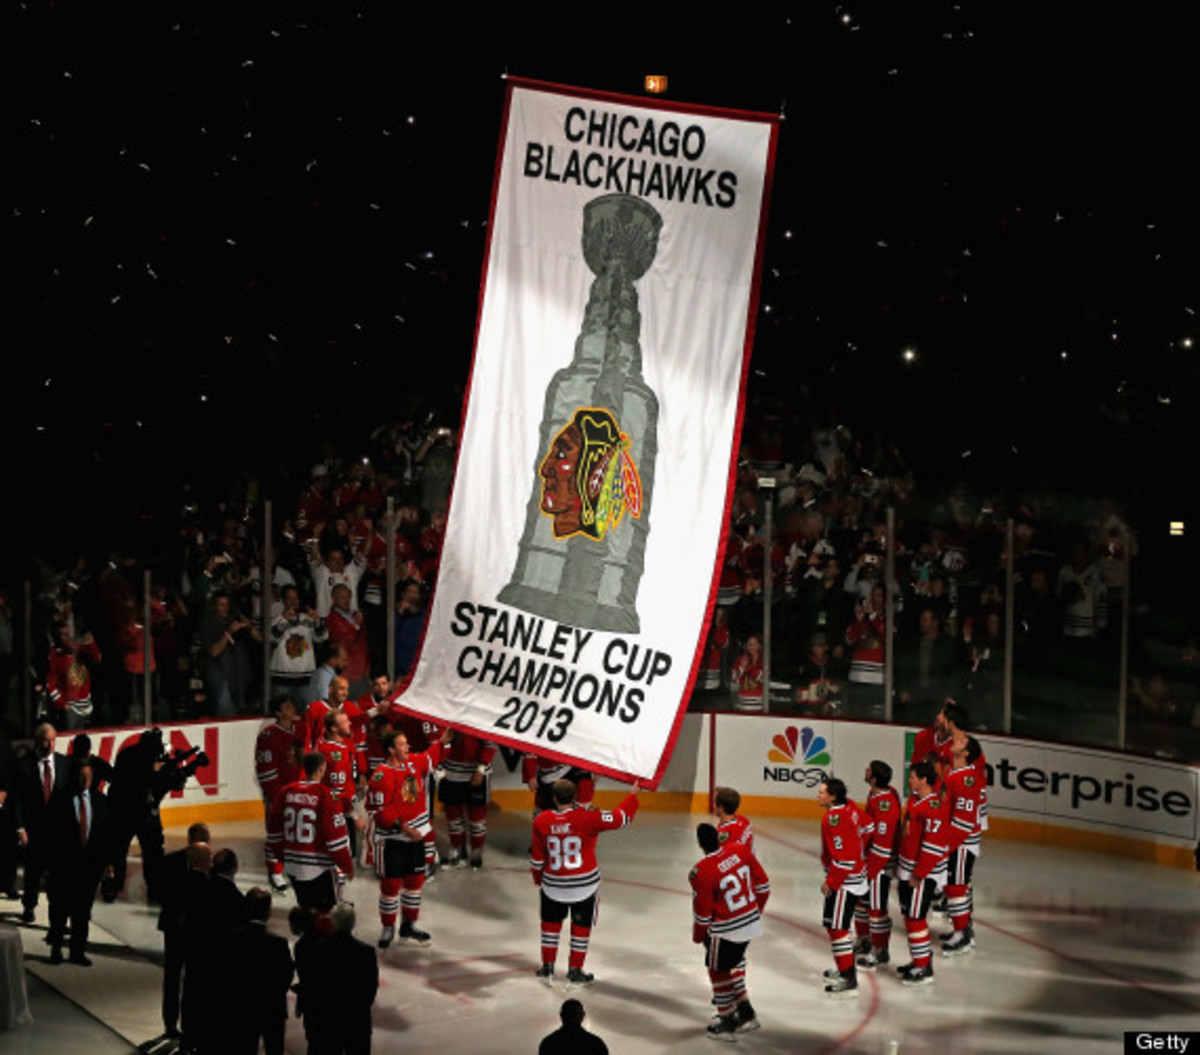 CHICAGO, IL - OCTOBER 01: Members of the Chicago Blackhawks watch as the 2013 Stanley Cup Championship banner is hung during a ceremony before taking on the Washington Capitals at the United Center on October 1, 2013 in Chicago, Illinois. (Photo by Jonathan Daniel/Getty Images)